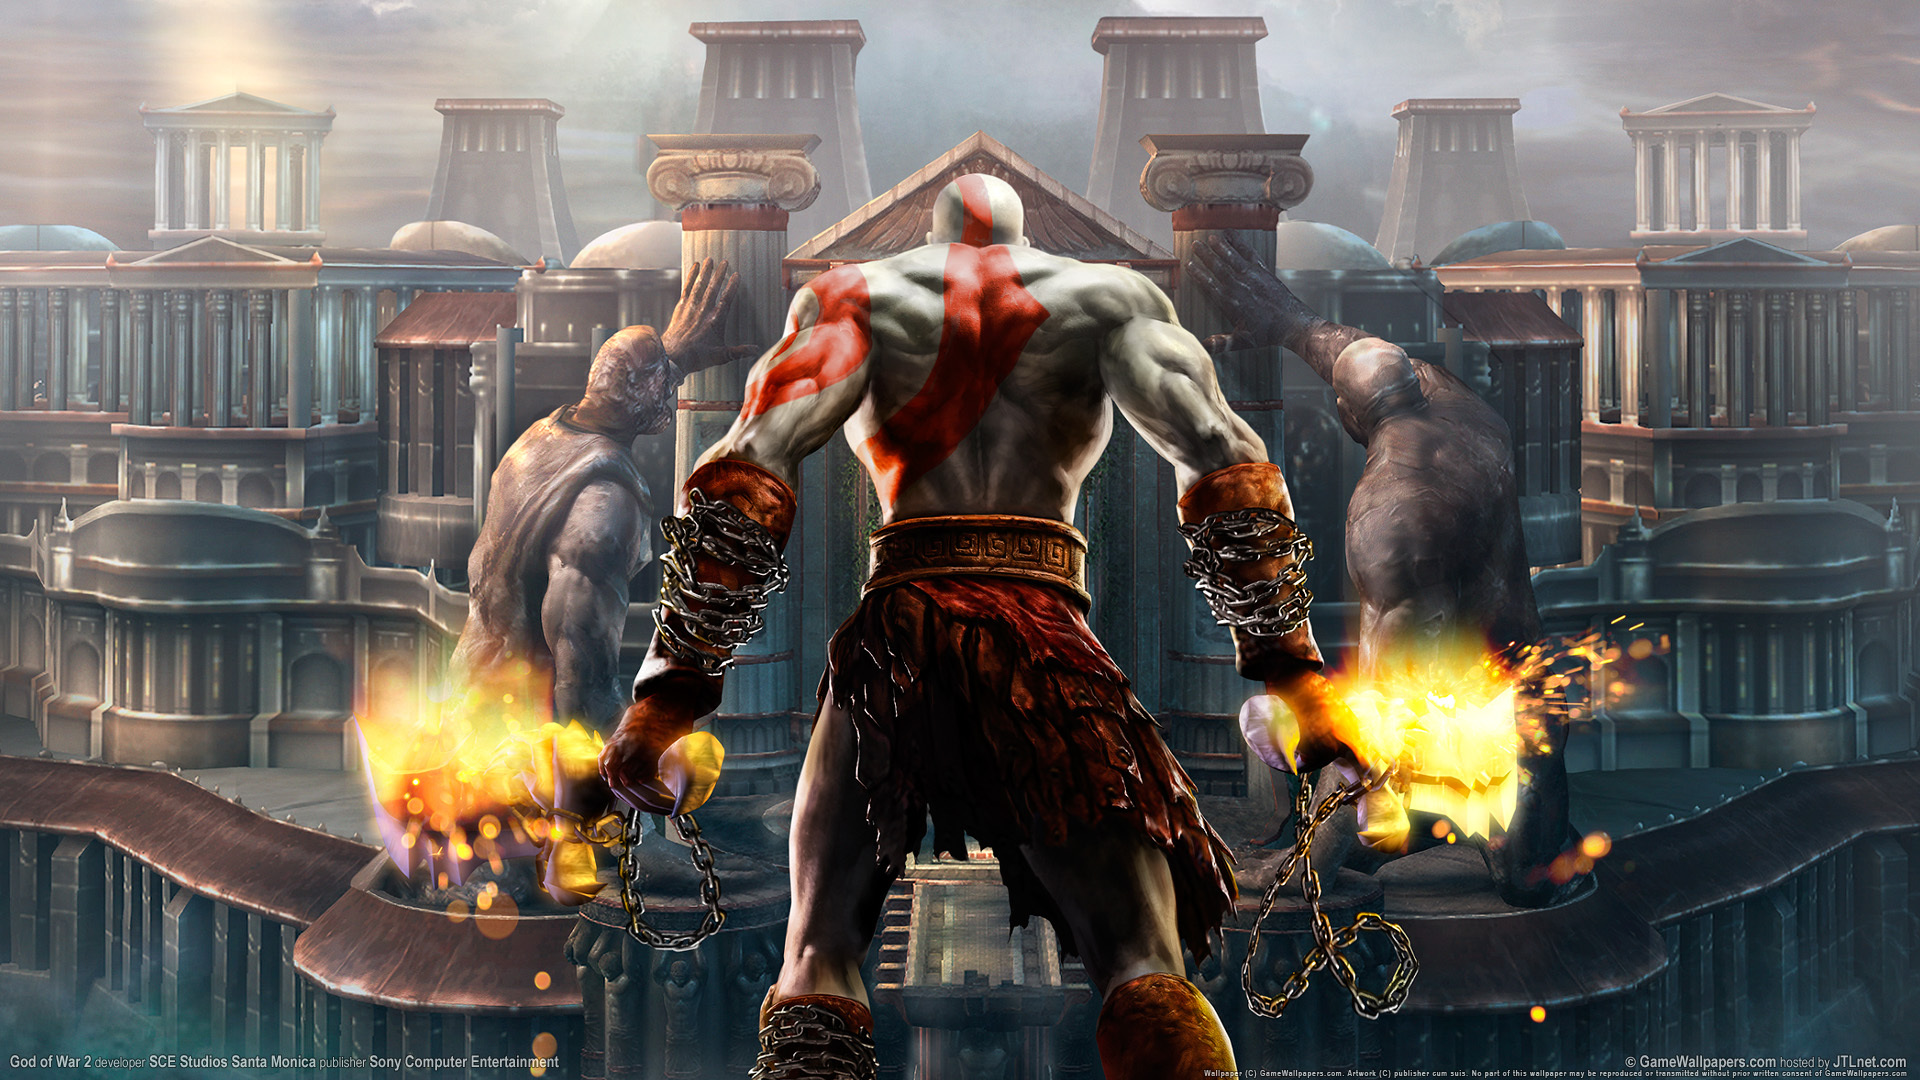 God of War: Ascension: the city wallpapers and images - wallpapers ...